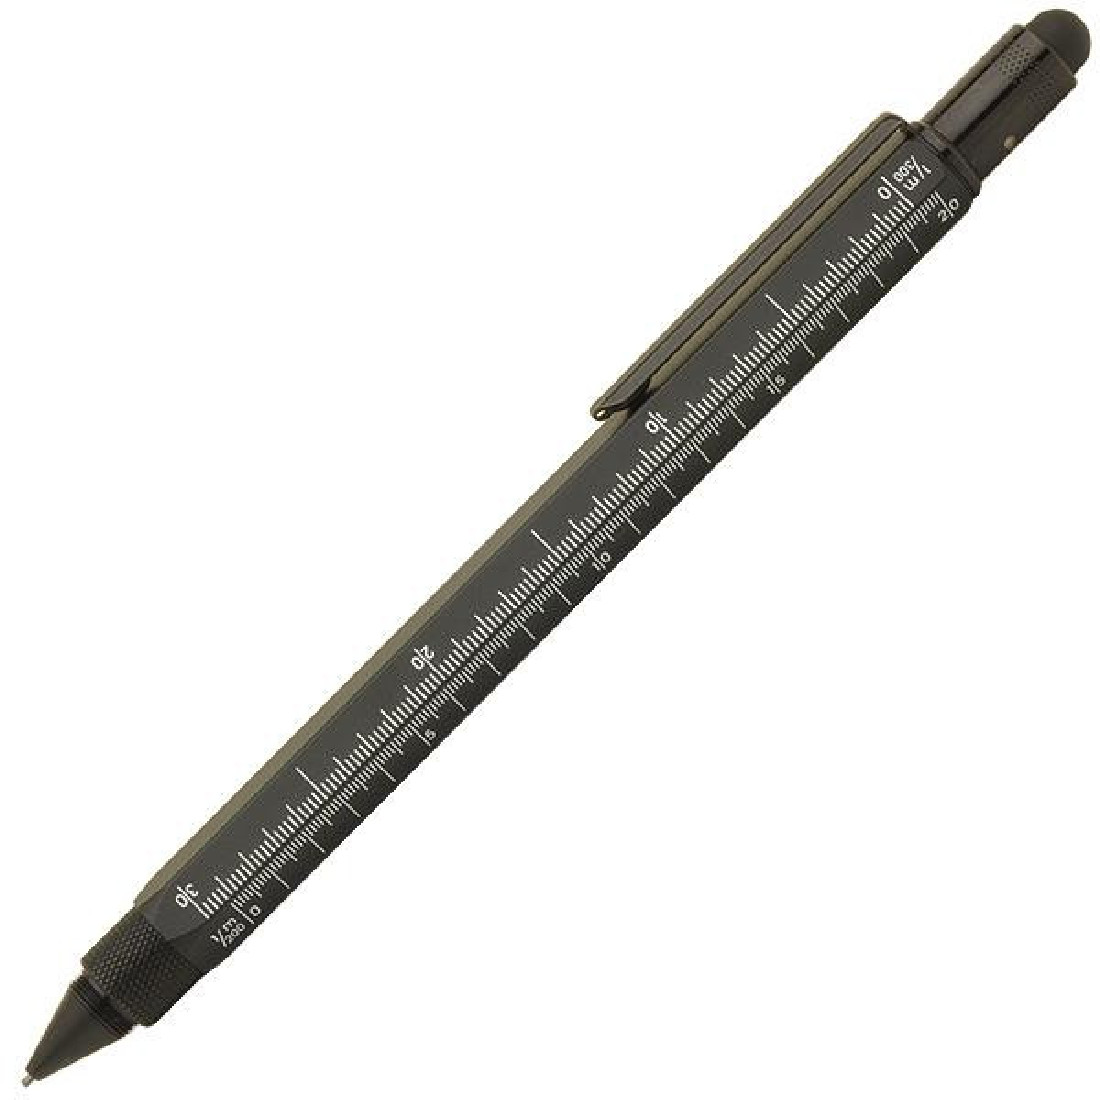 ONE TOUCH STYLUS 9 FUNCTION TOOL PENCIL BLACK MONTEVERDE